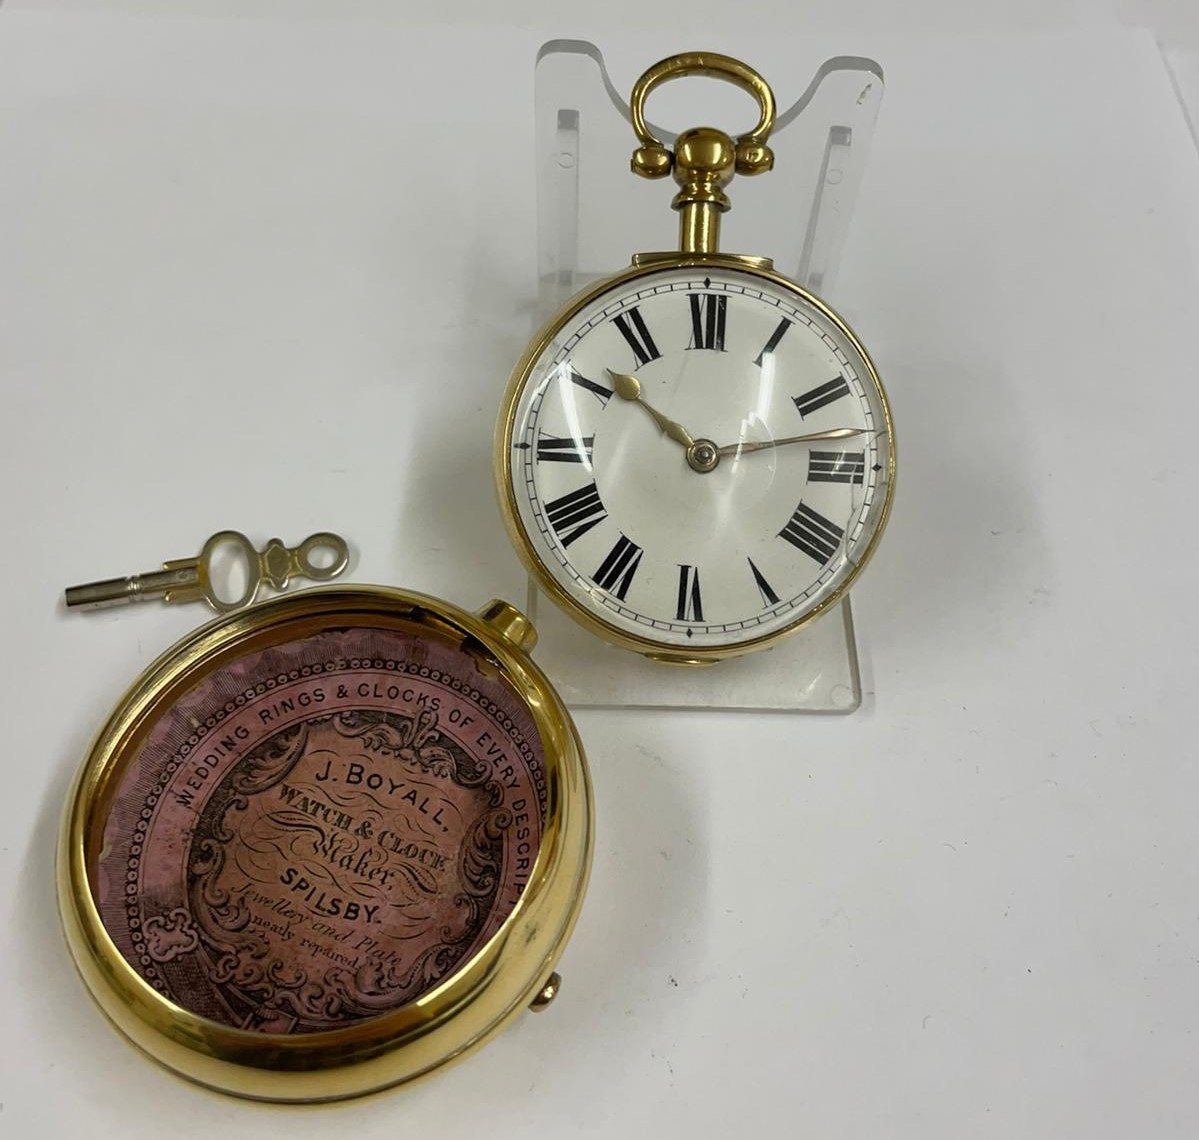 Antique yellow metal verge fusee pocket watch, working, 155.9g but sold with no guarantees